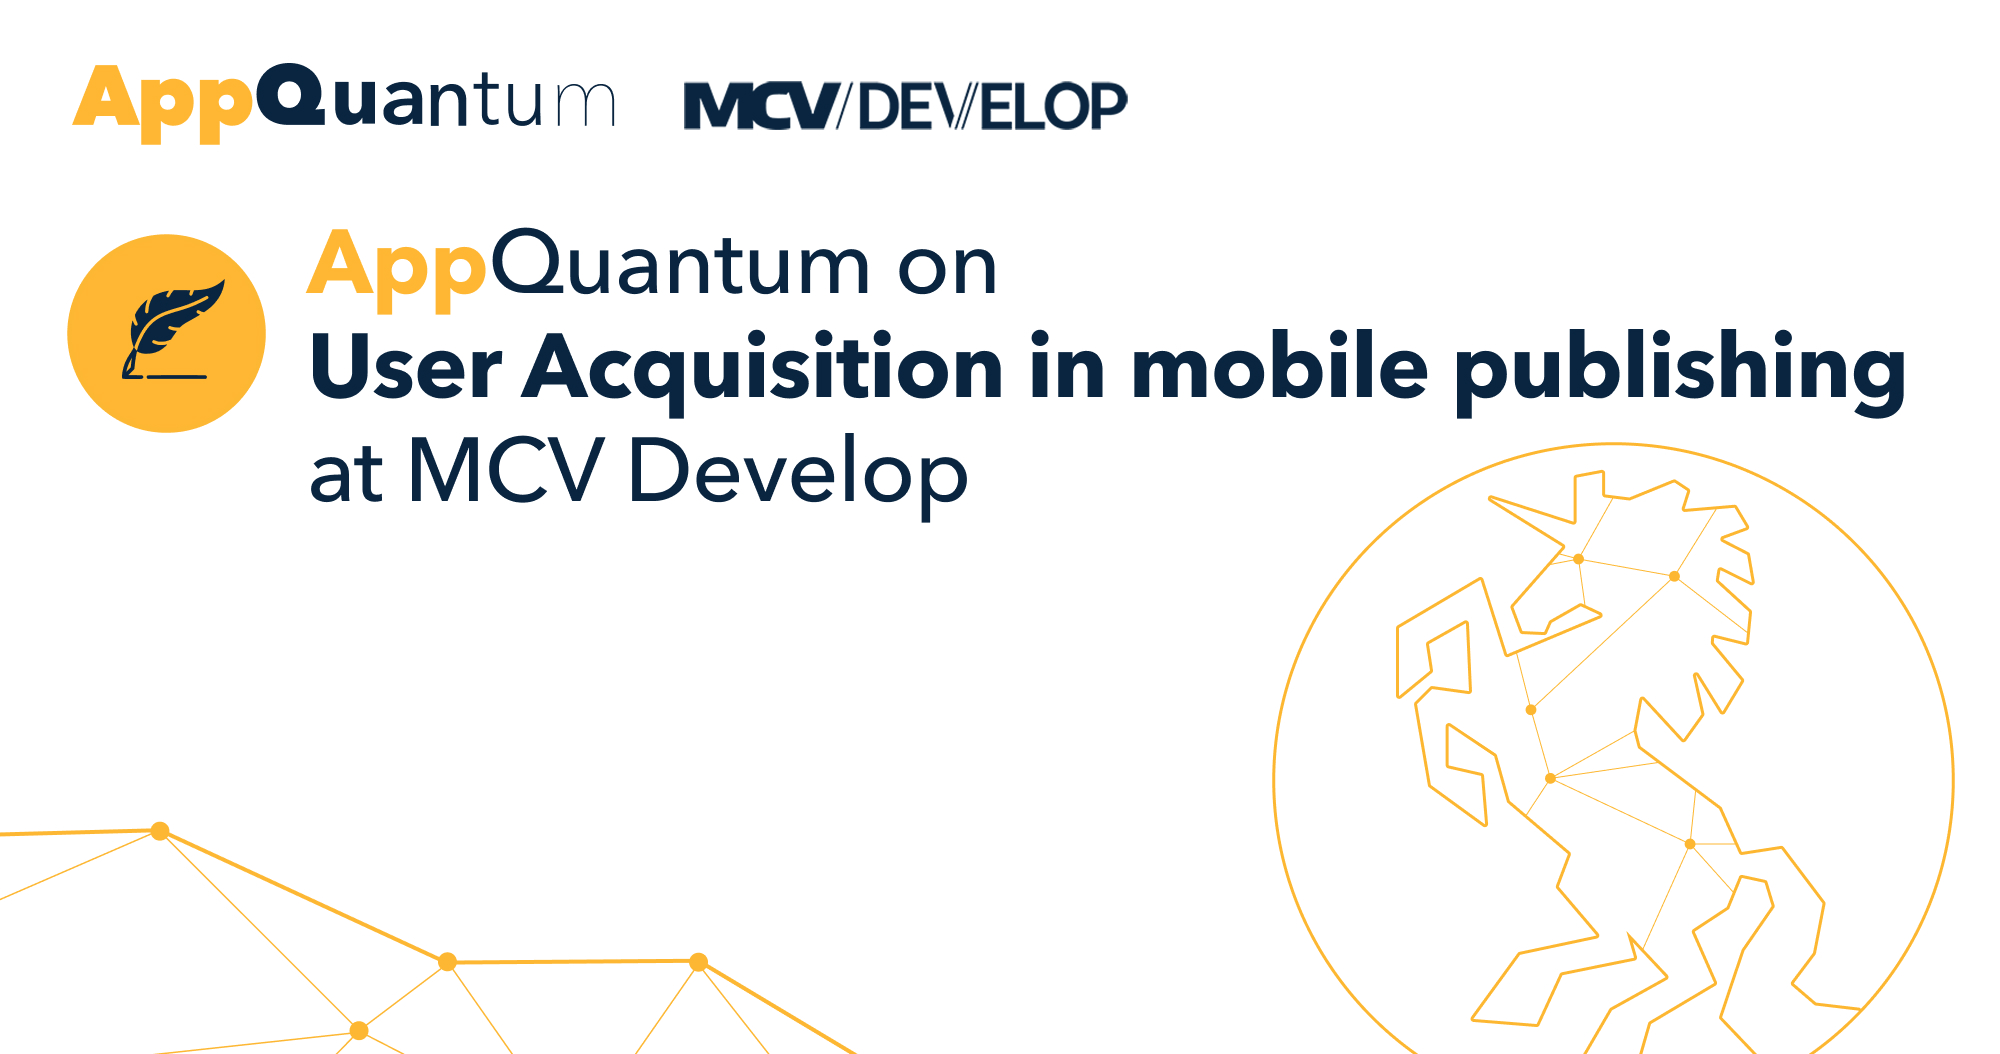 AppQuantum on User Acquisition in Mobile Publishing at MCV Develop